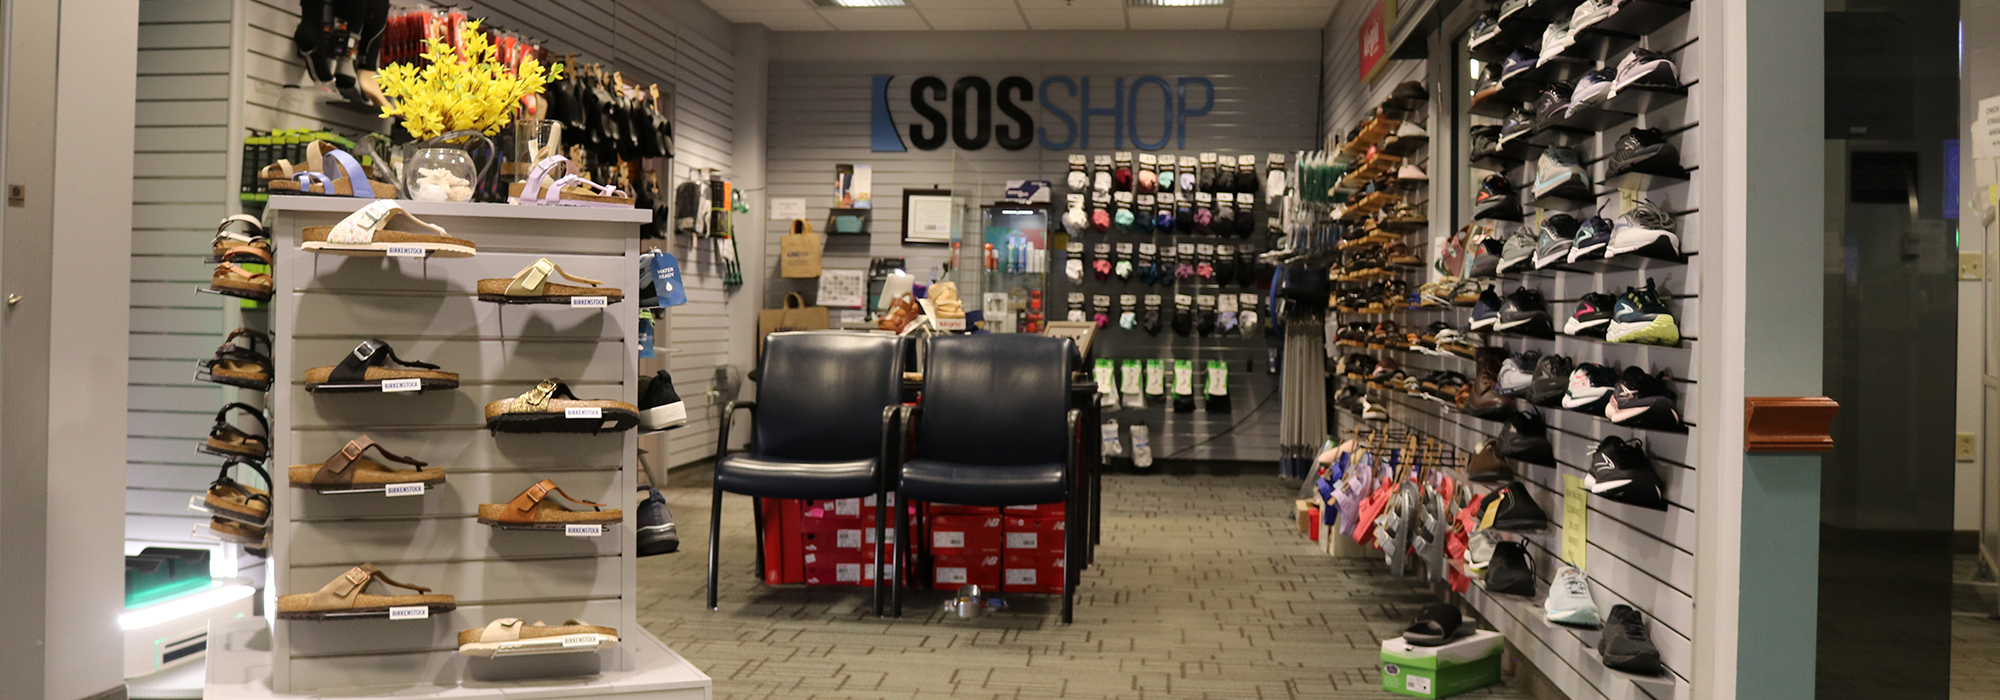 north syracuse shopspace from sos shop near syracuse ny from syracuse orthopedic specialists